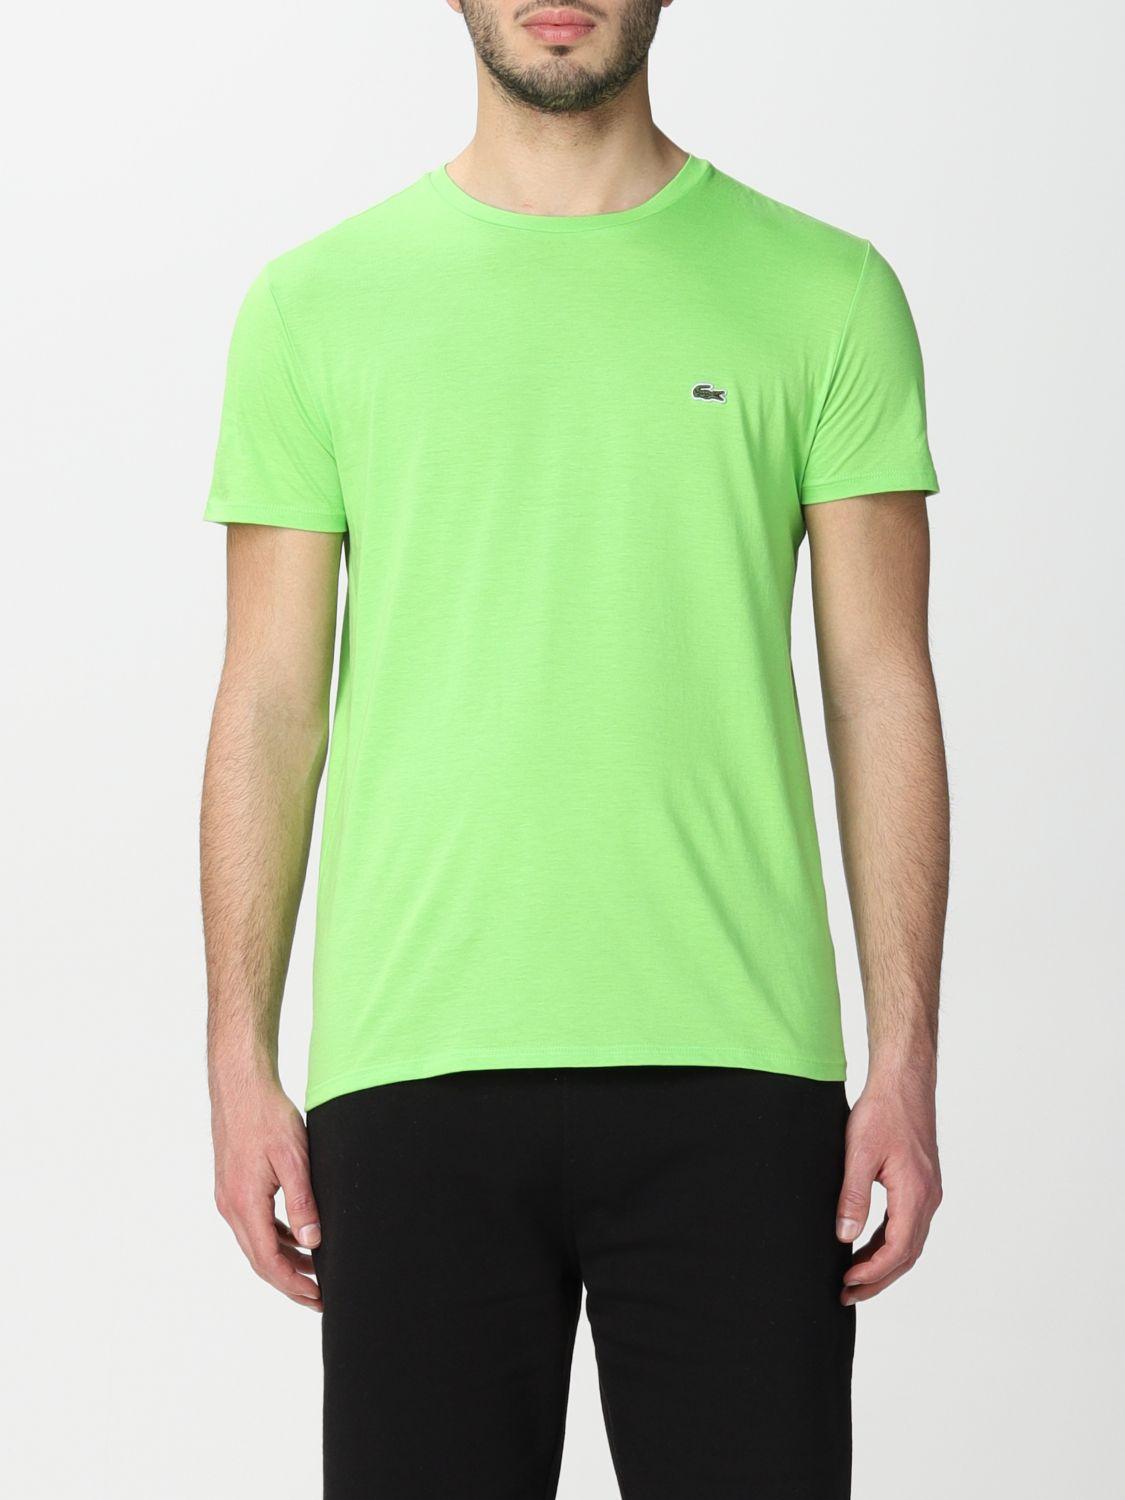 Lacoste T-shirt in Lime (Green) for Men | Lyst